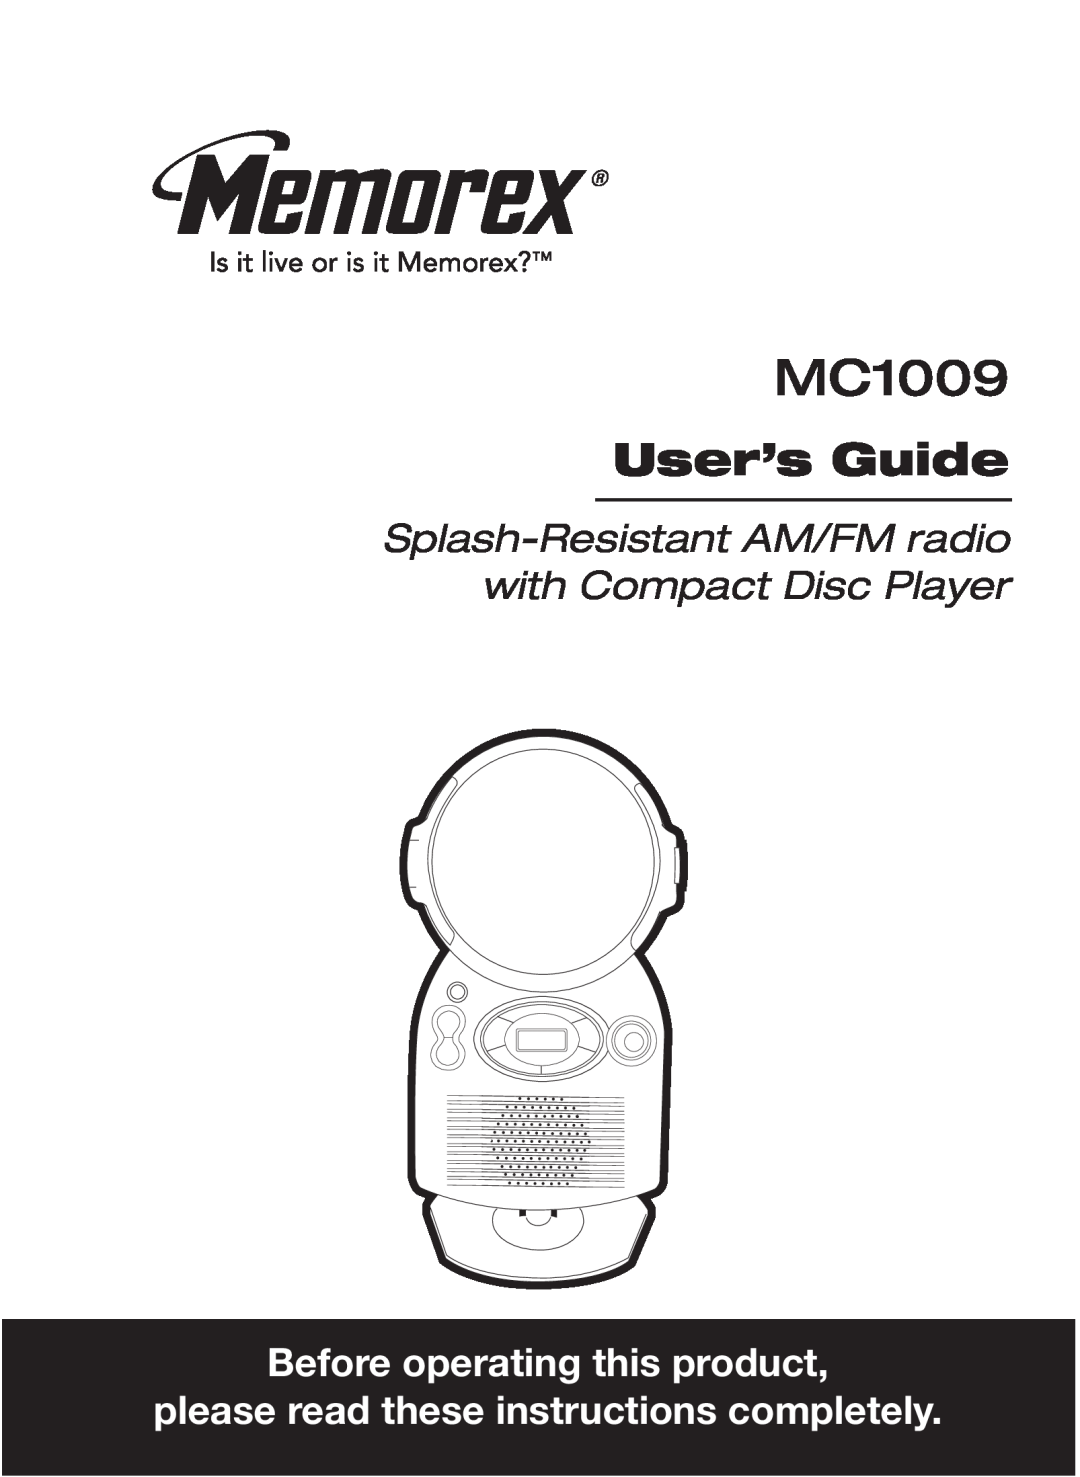 Memorex MC1009 manual User’s Guide, Before operating this product, please read these instructions completely 